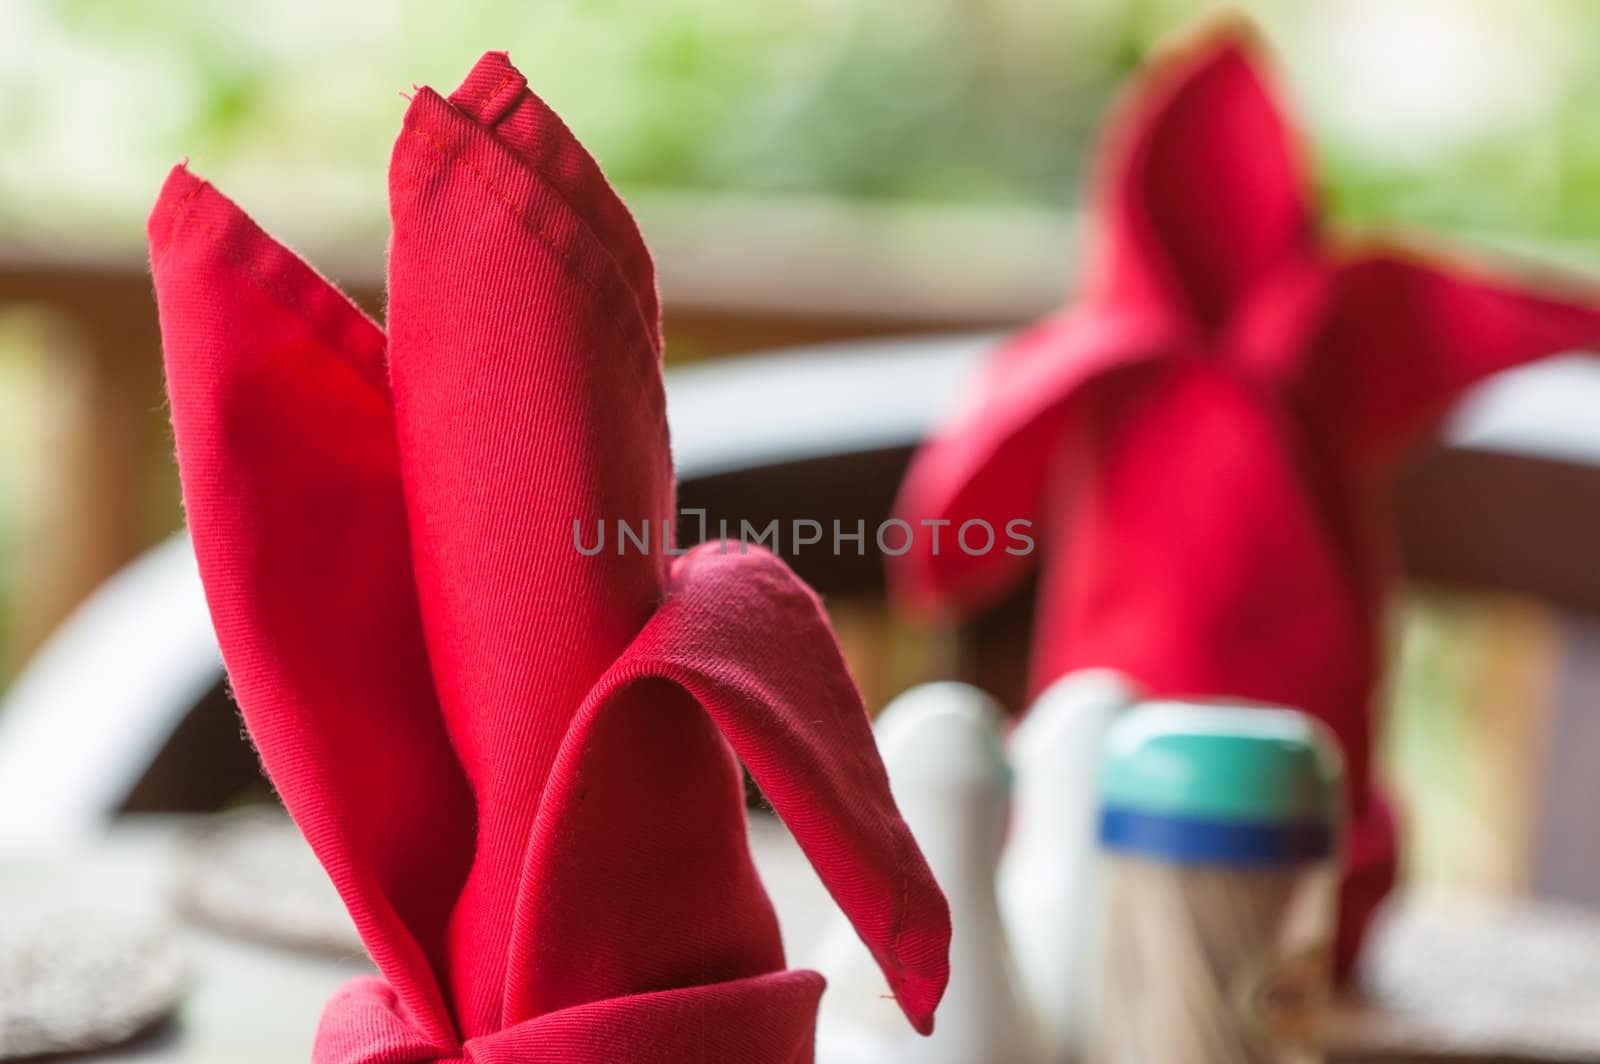 Folded napkins outdoors on a table in the tropics